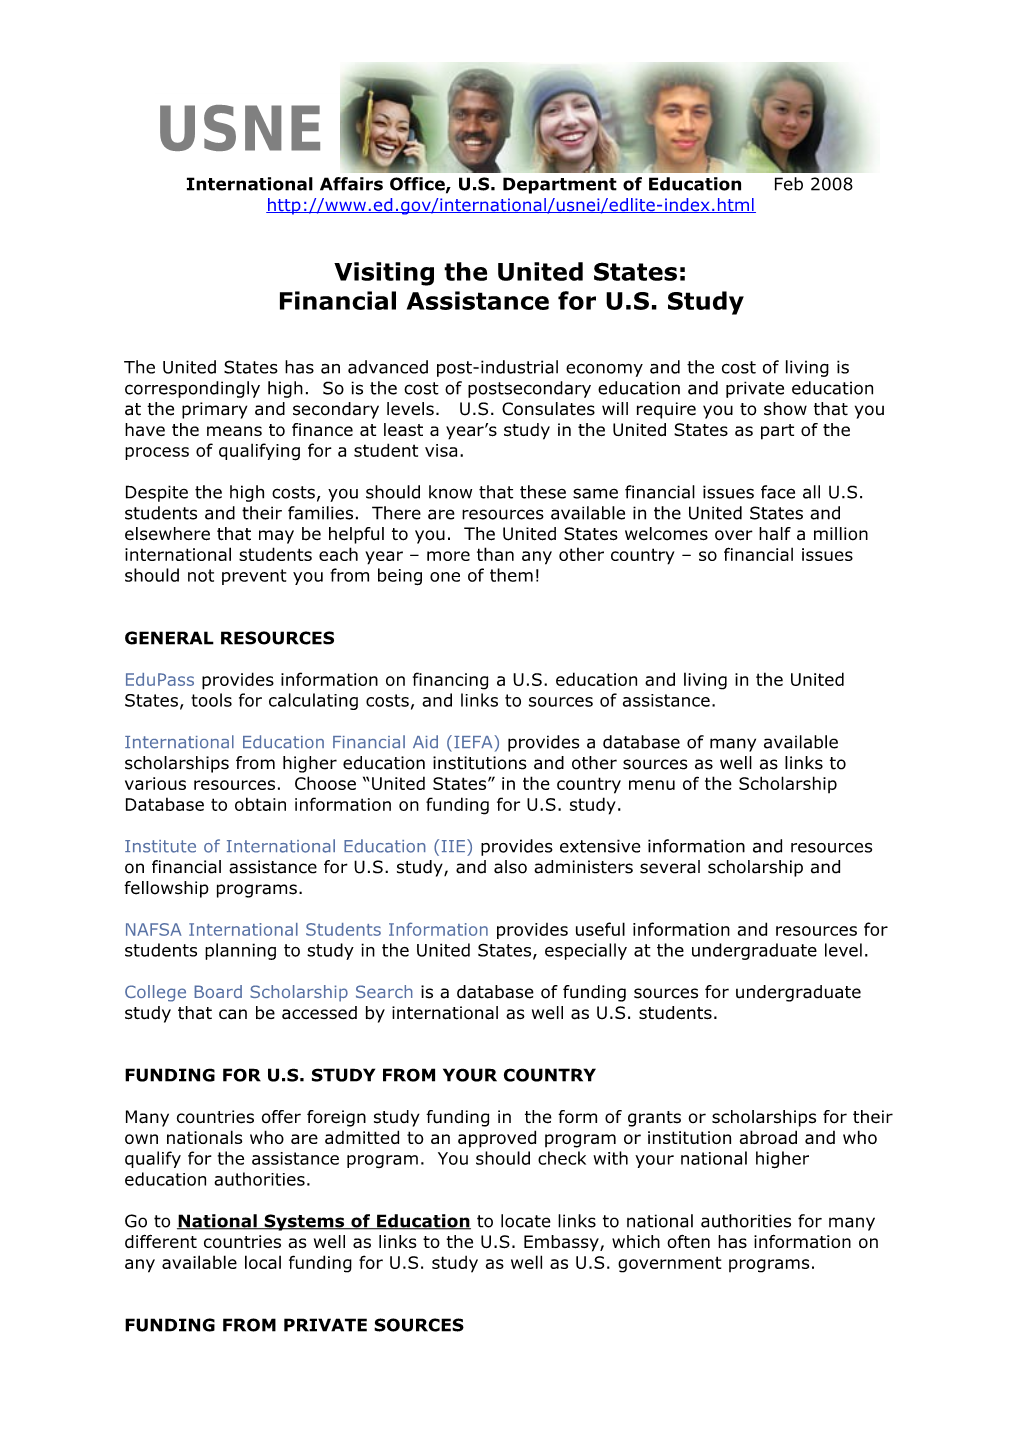 Visiting the United States: Financial Assistance for US Study (MS Word)